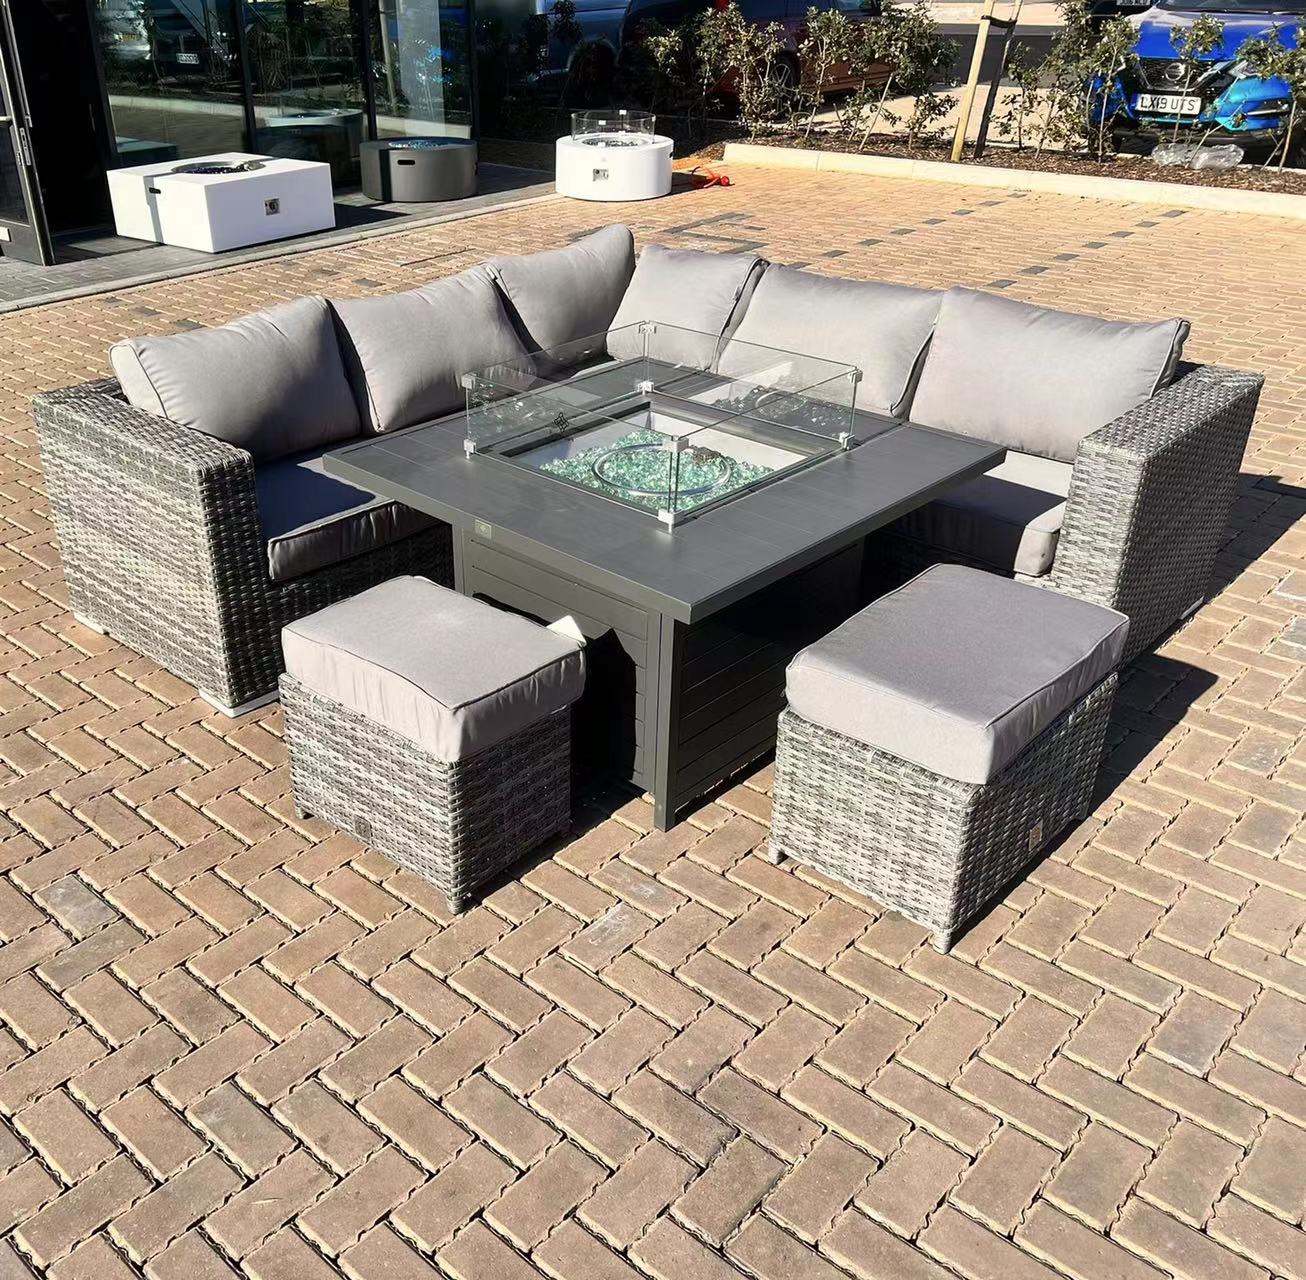 Rose Range Corner Set with Charcoal Square High fire pit table and 2 Stools